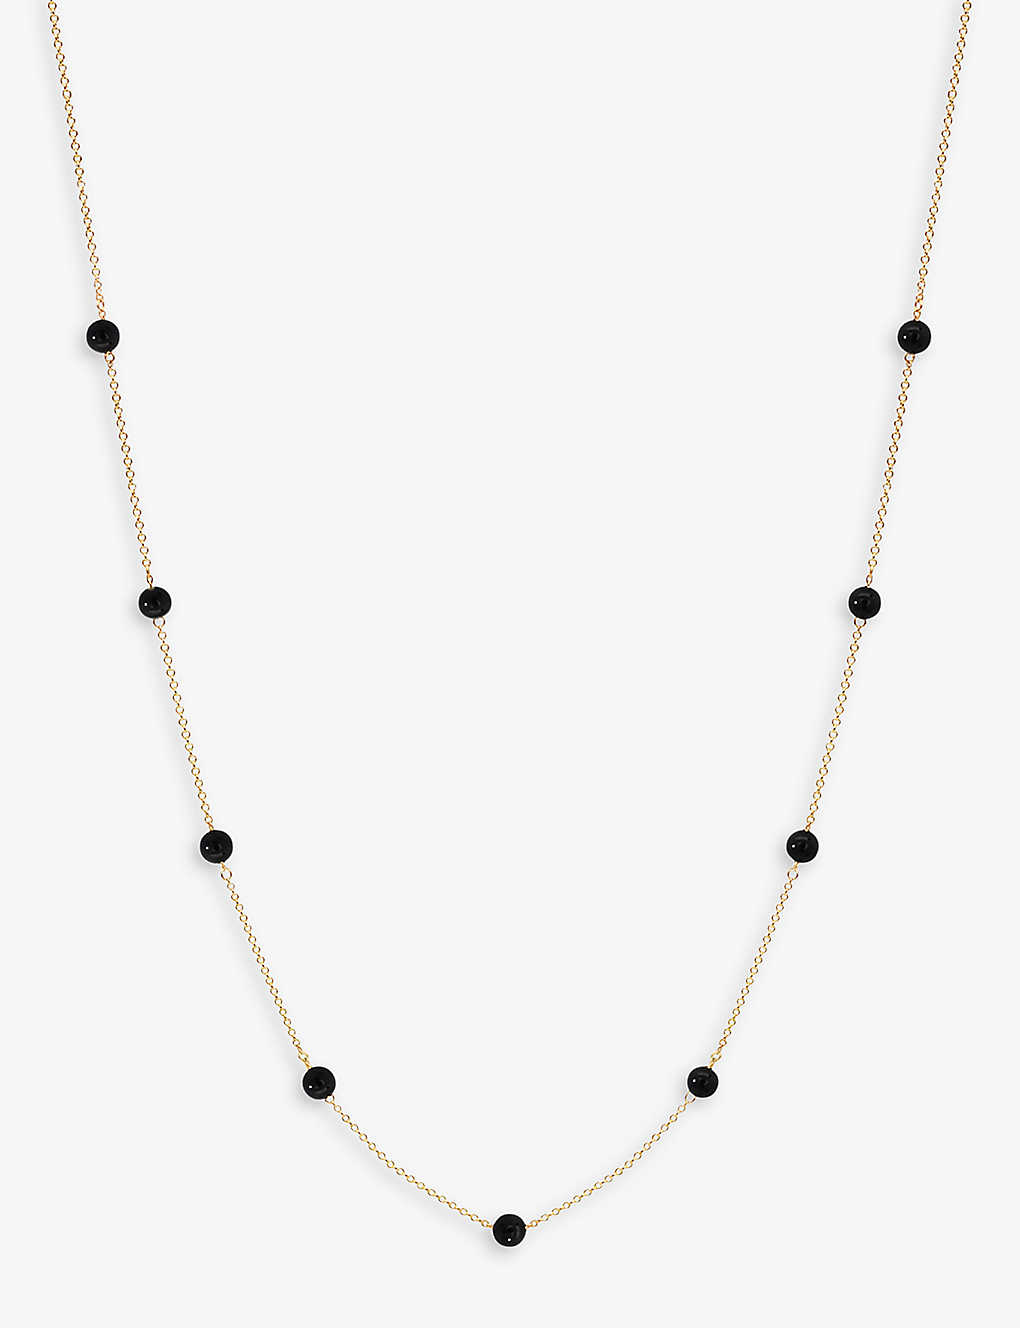 The Alkemistry Womens Yellow Gold Beaded 18ct Yellow-gold And Onyx Necklace